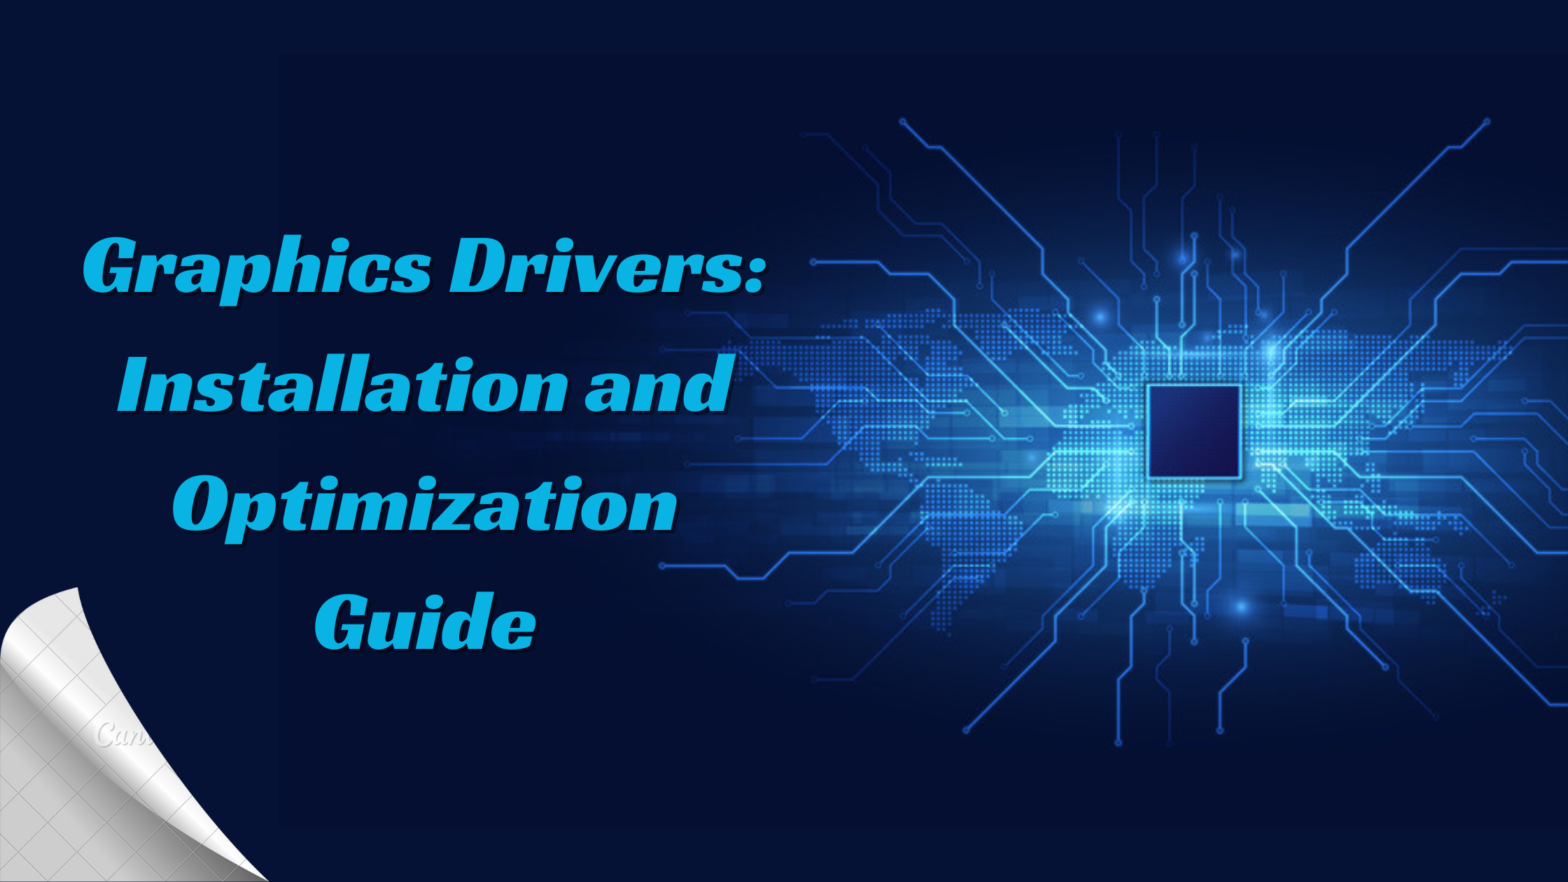 Graphics Drivers: Installation and Optimization Guide